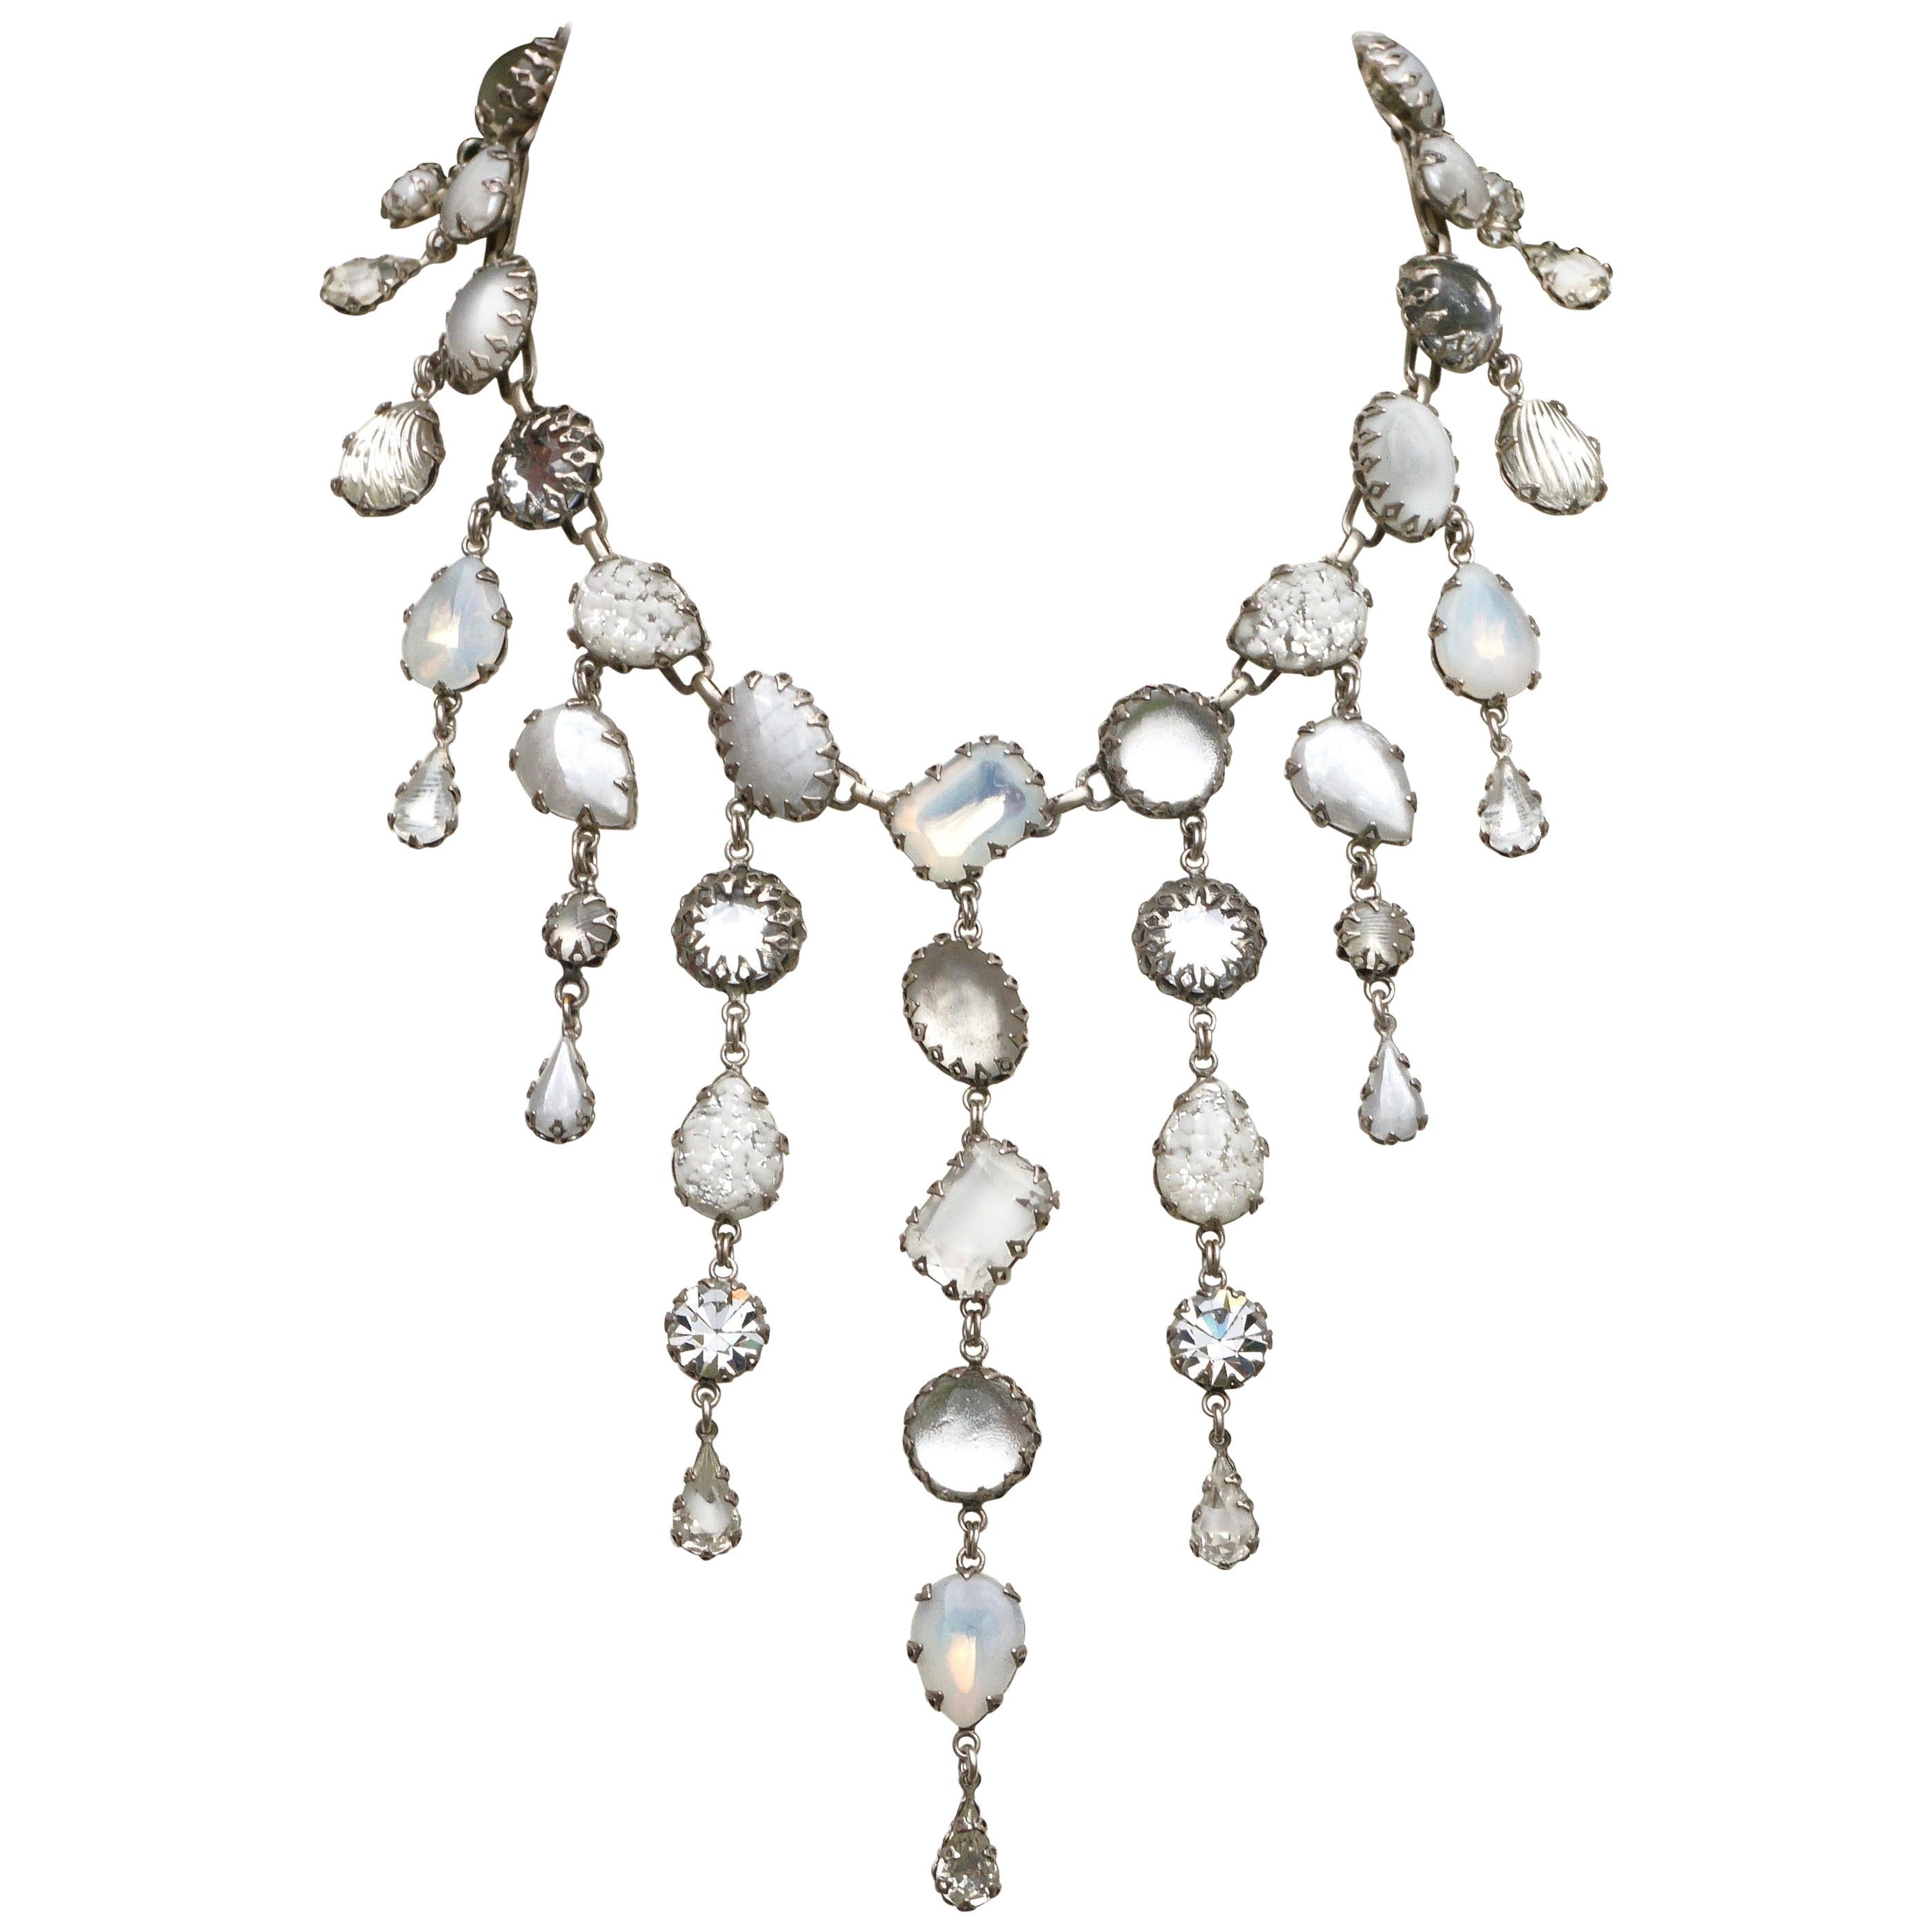 De Luxe NYC/A'dam Silver Tone White Clear and Opaline Art Glass Drop Necklace